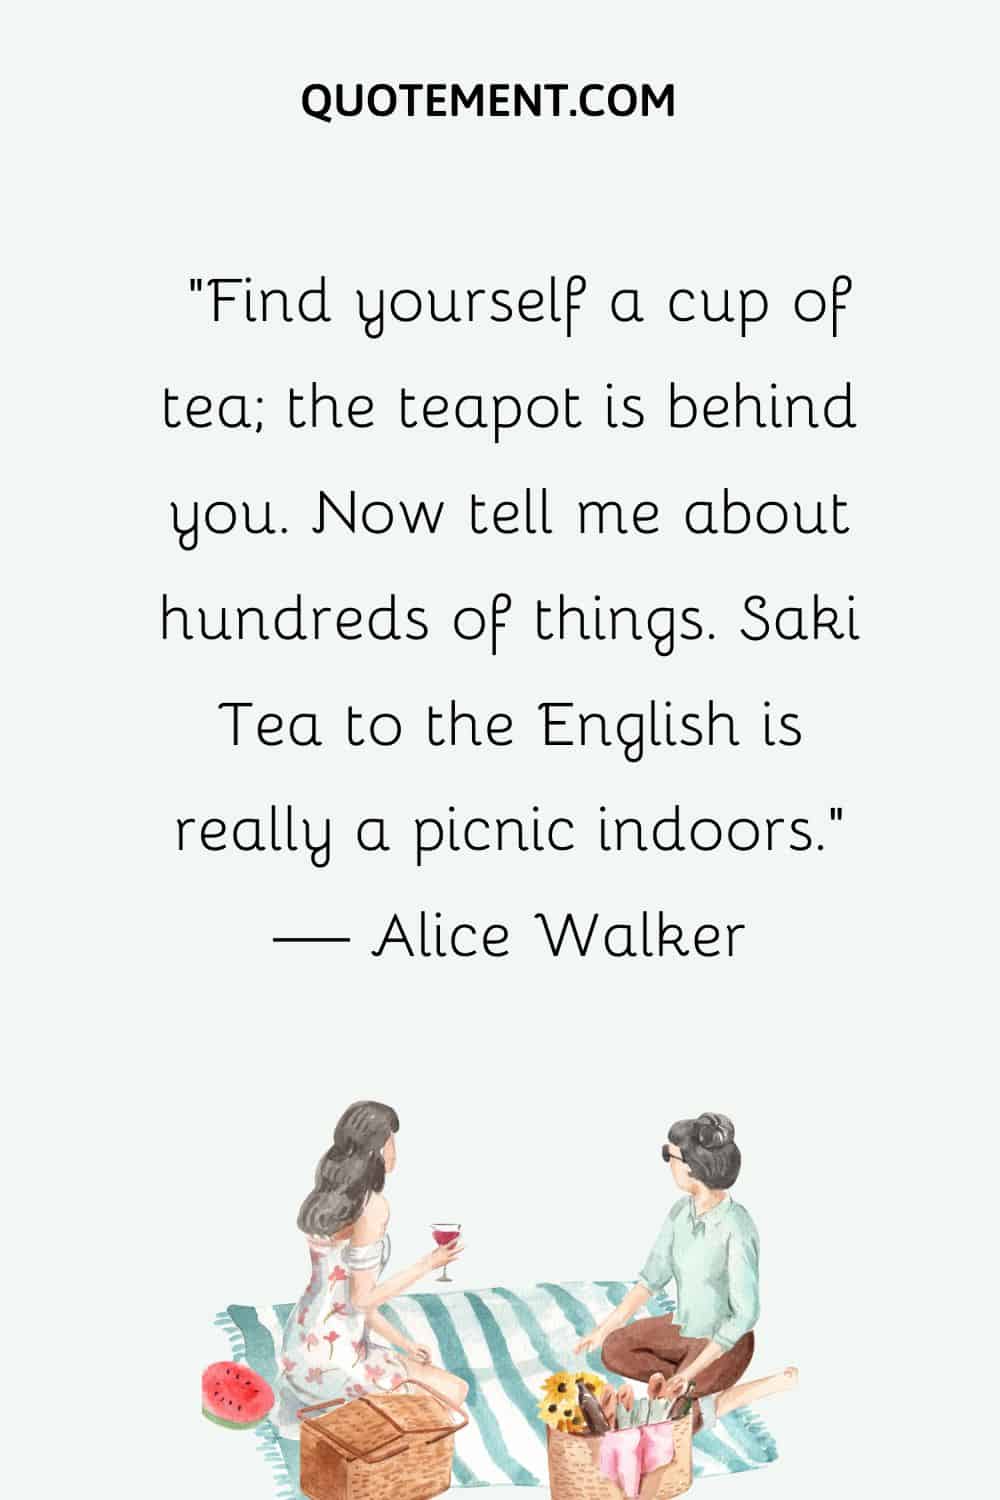 Find yourself a cup of tea; the teapot is behind you